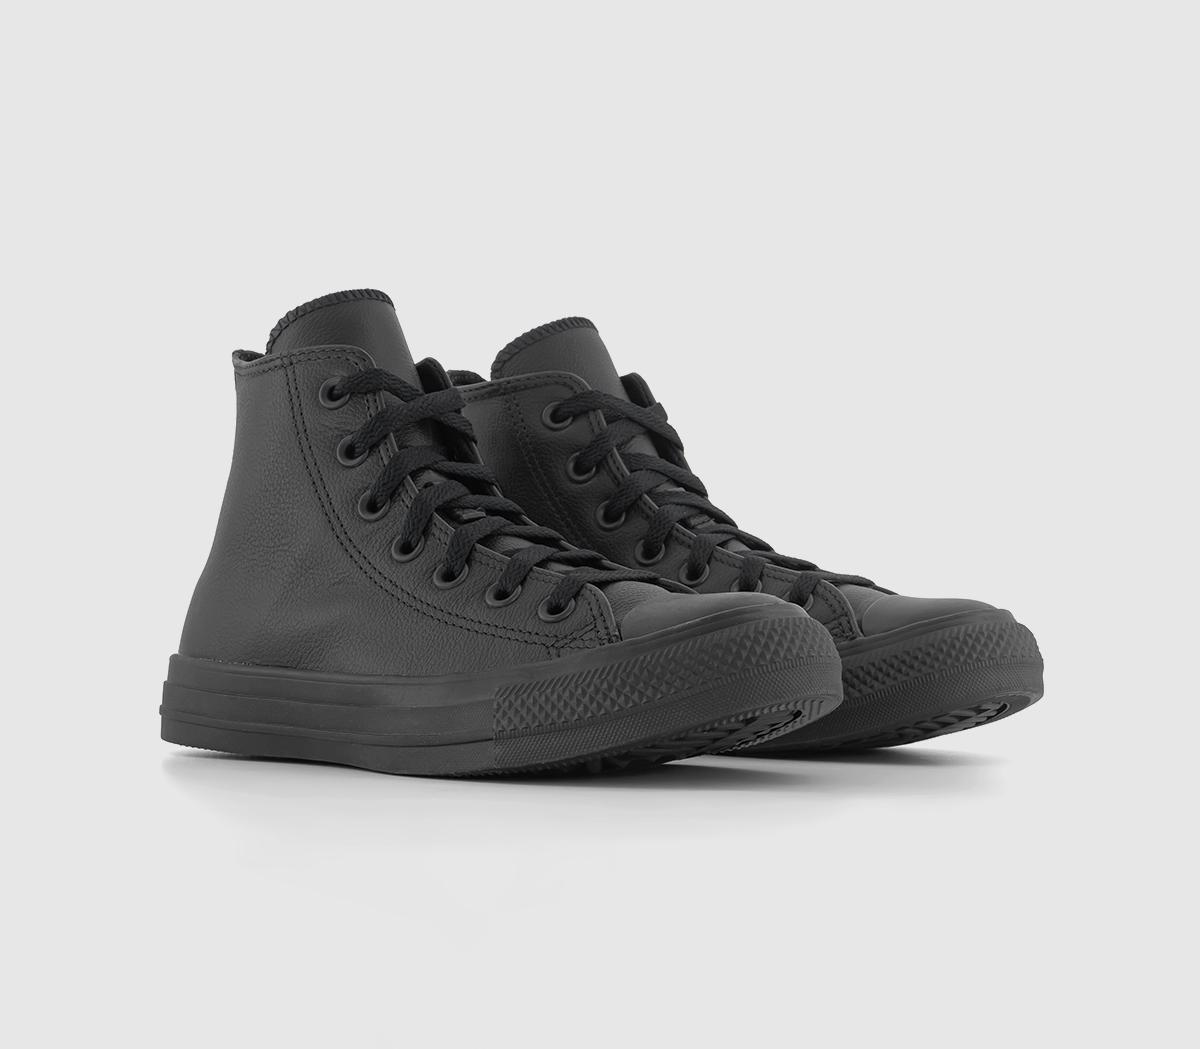 Converse Black Leather All Star High Trainers, 8